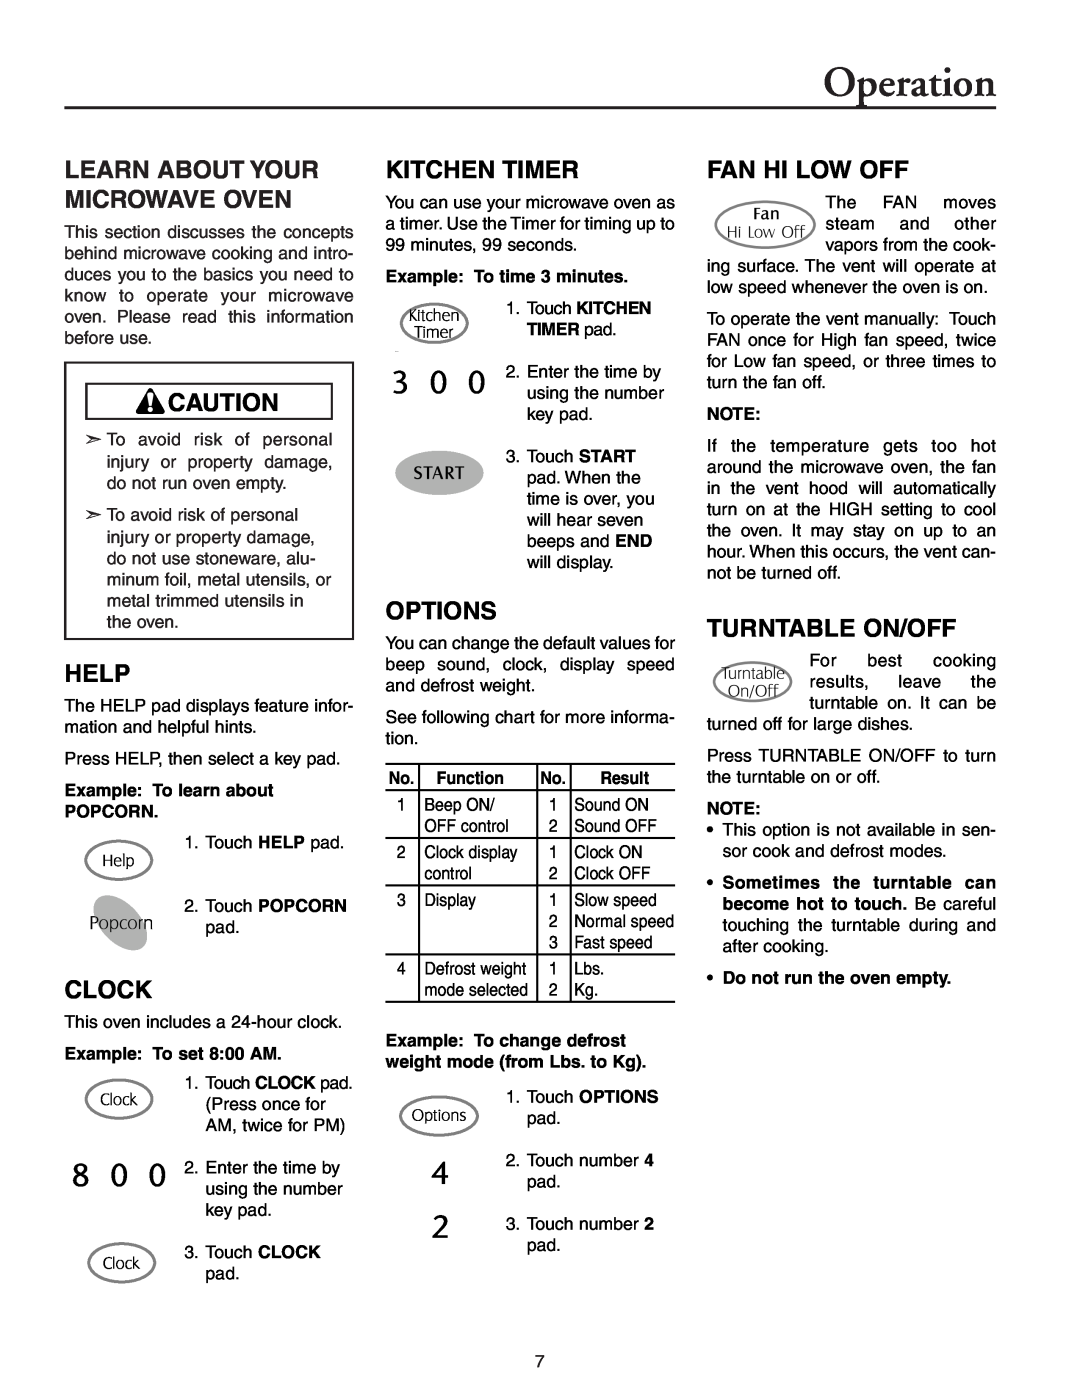 Maytag MMV51566AA/MMV5156AC owner manual Operation, Learn About Your Microwave Oven, Help, Clock, Kitchen Timer, Options 